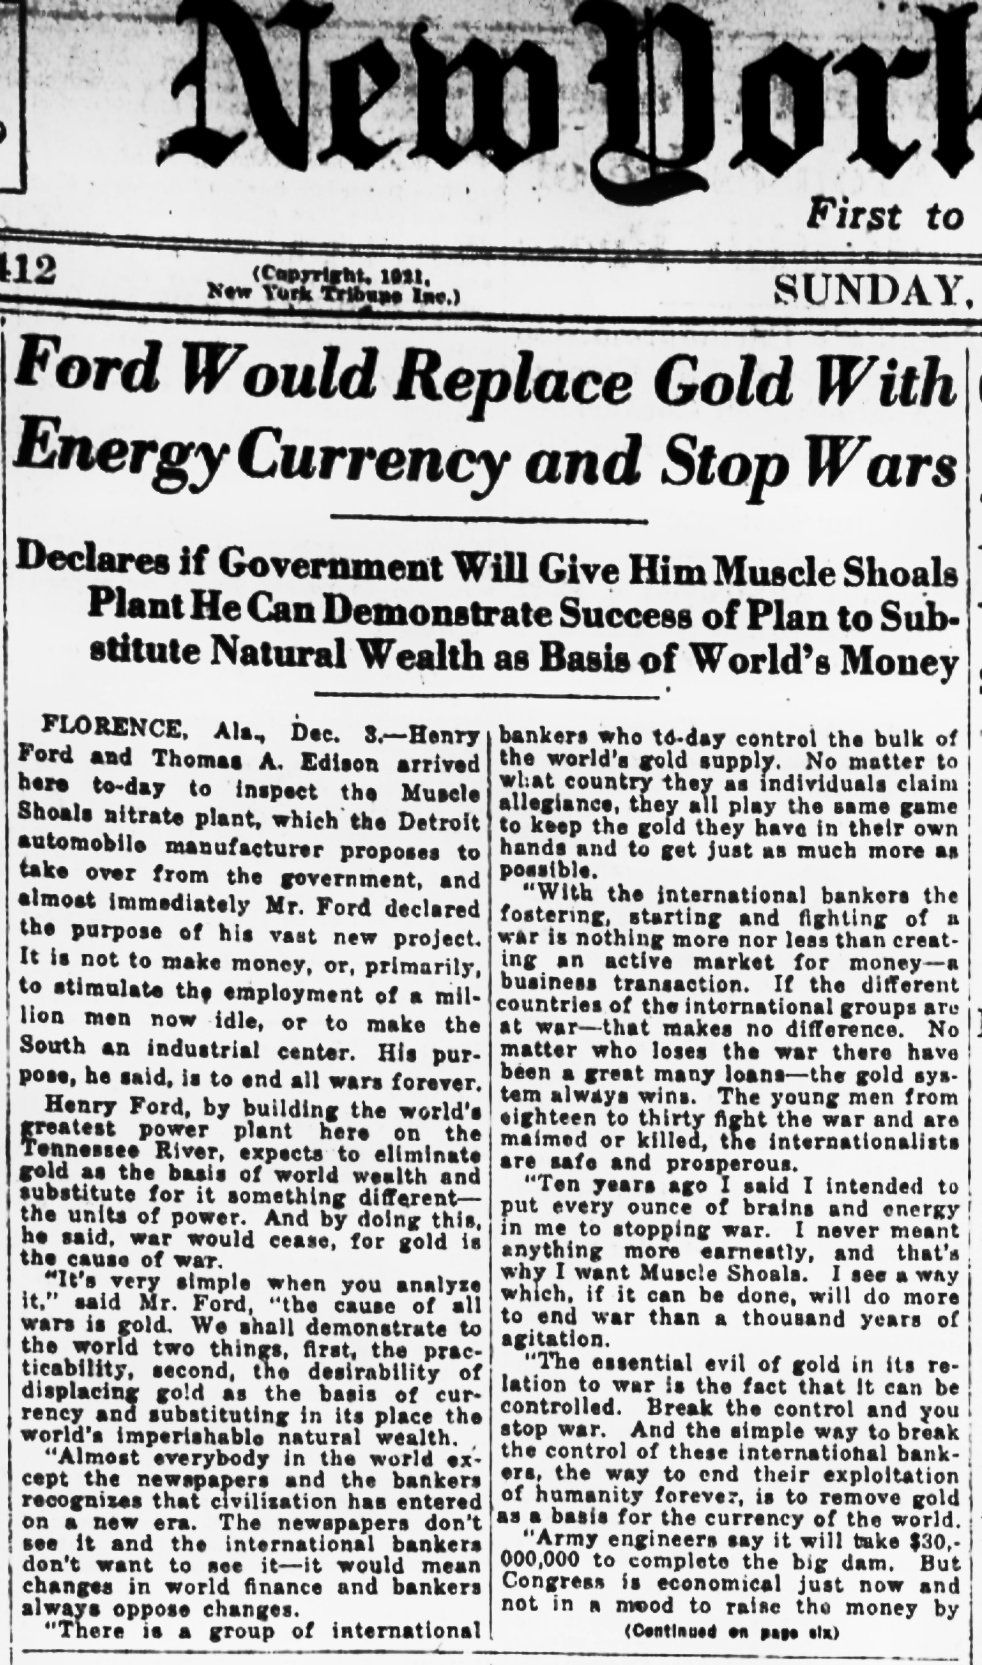 Henry Ford proposed a currency based on energy to replace the gold standard